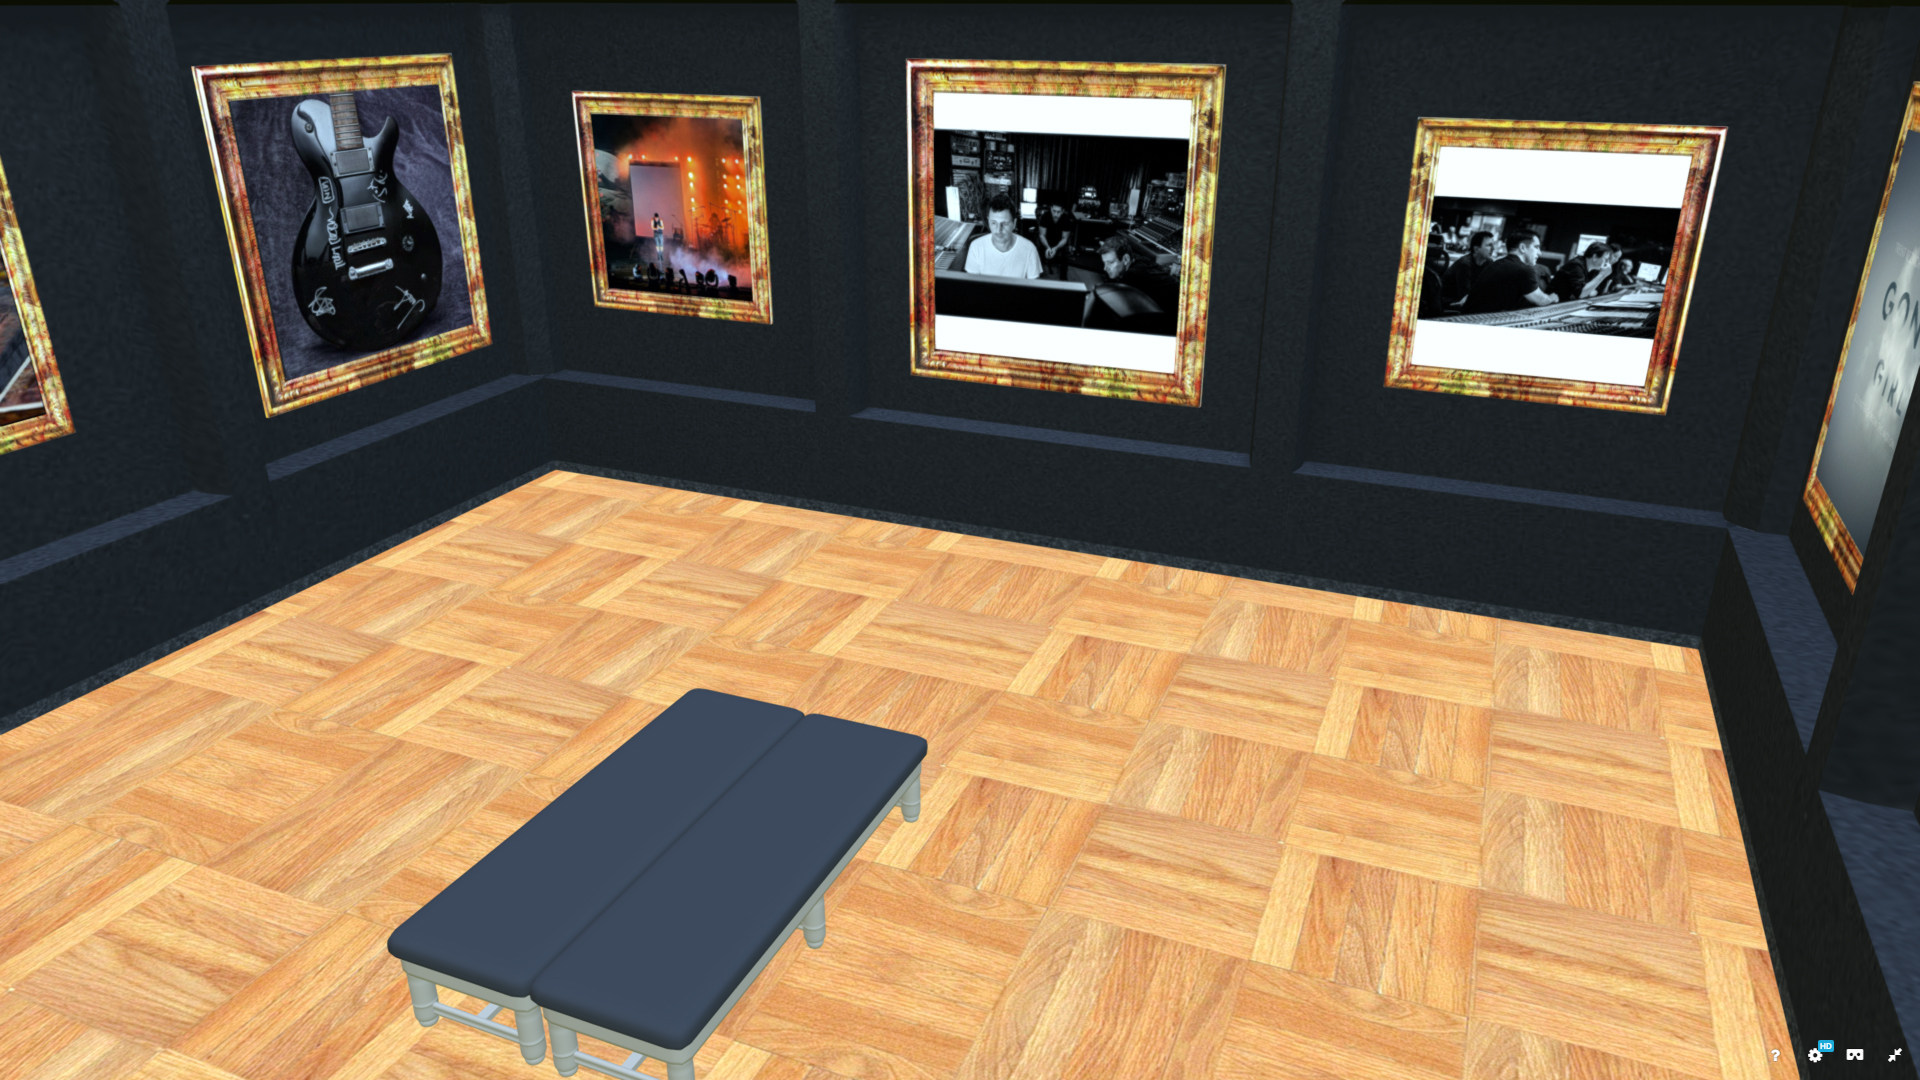 Turn Your Instagram Pictures into a Virtual Museum